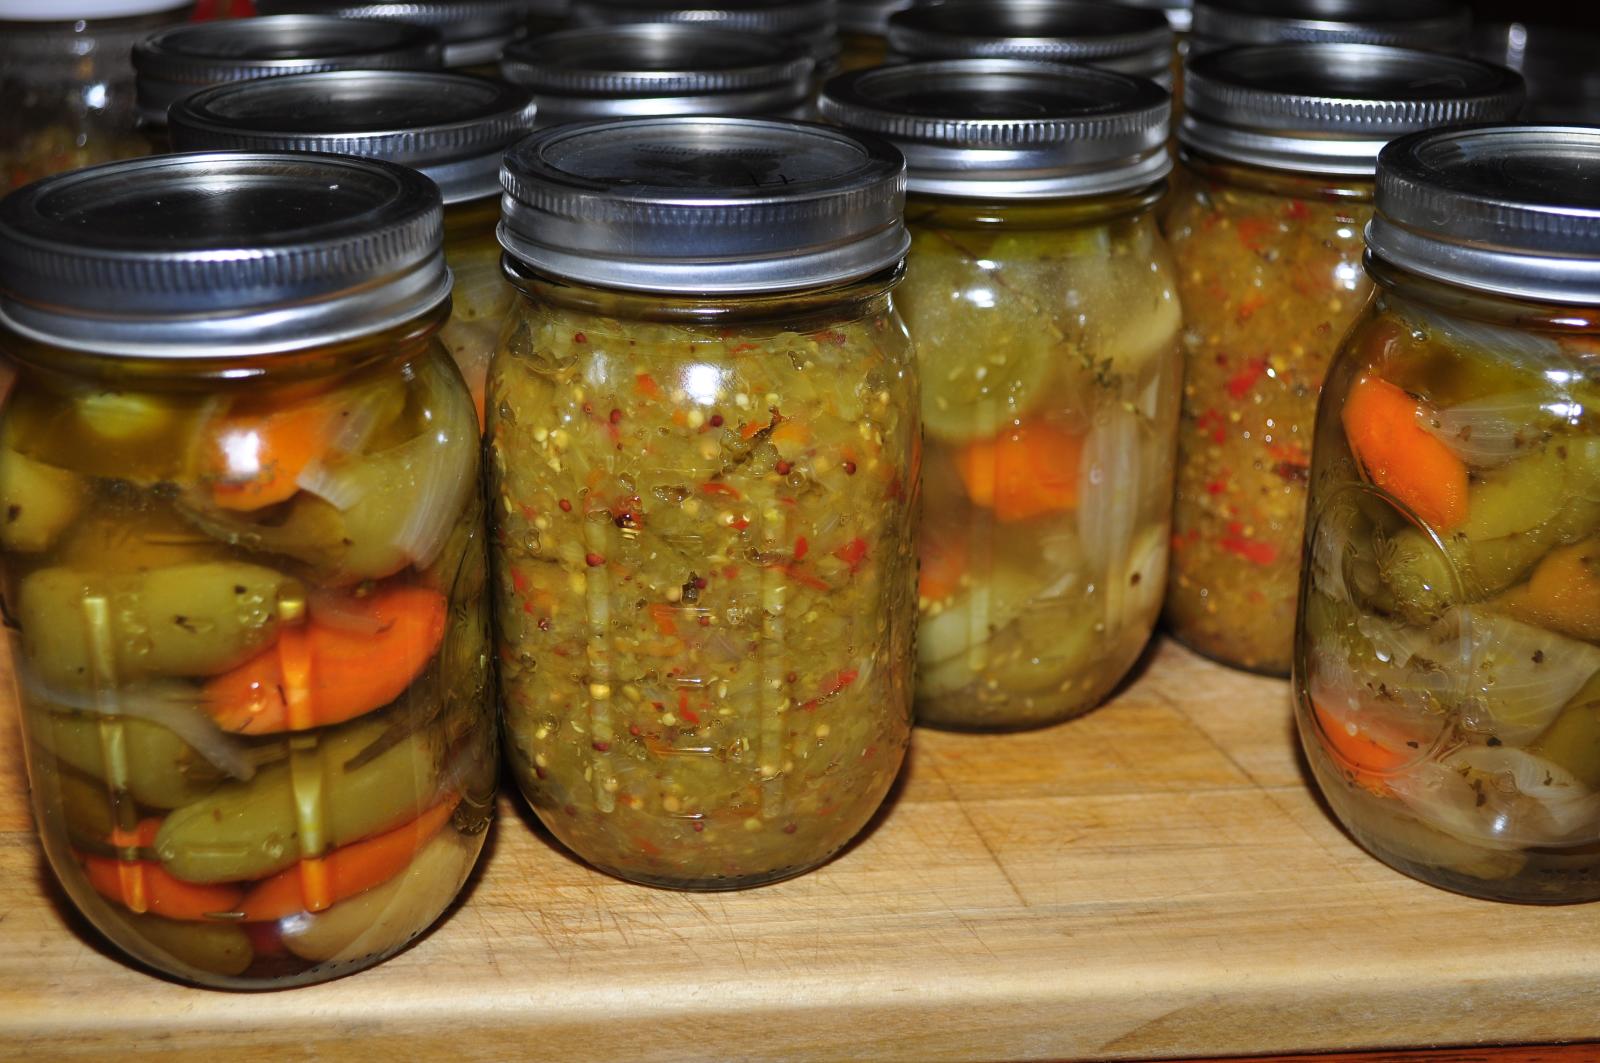 six jars are filled with pickles and carrots